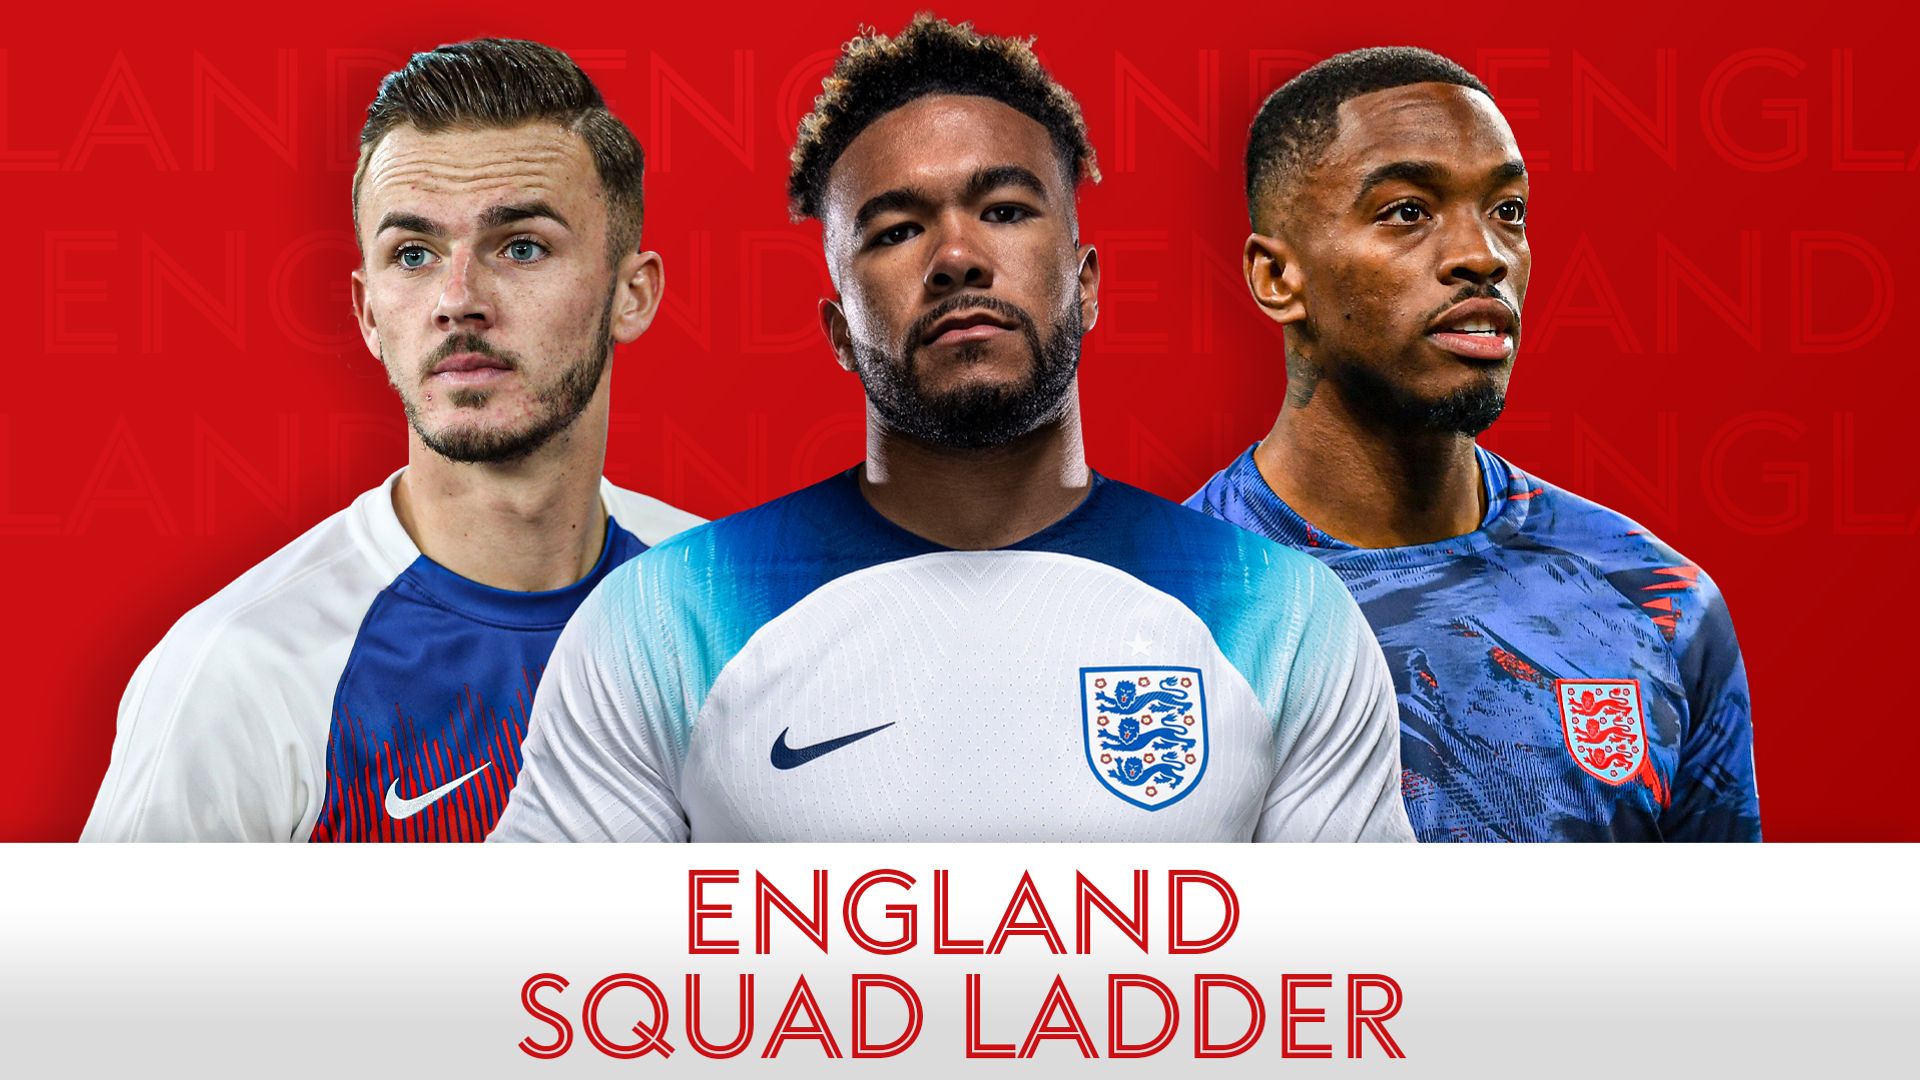 England World Cup squad ladder: Toney climbs, James falls, Maddison's hopes dented